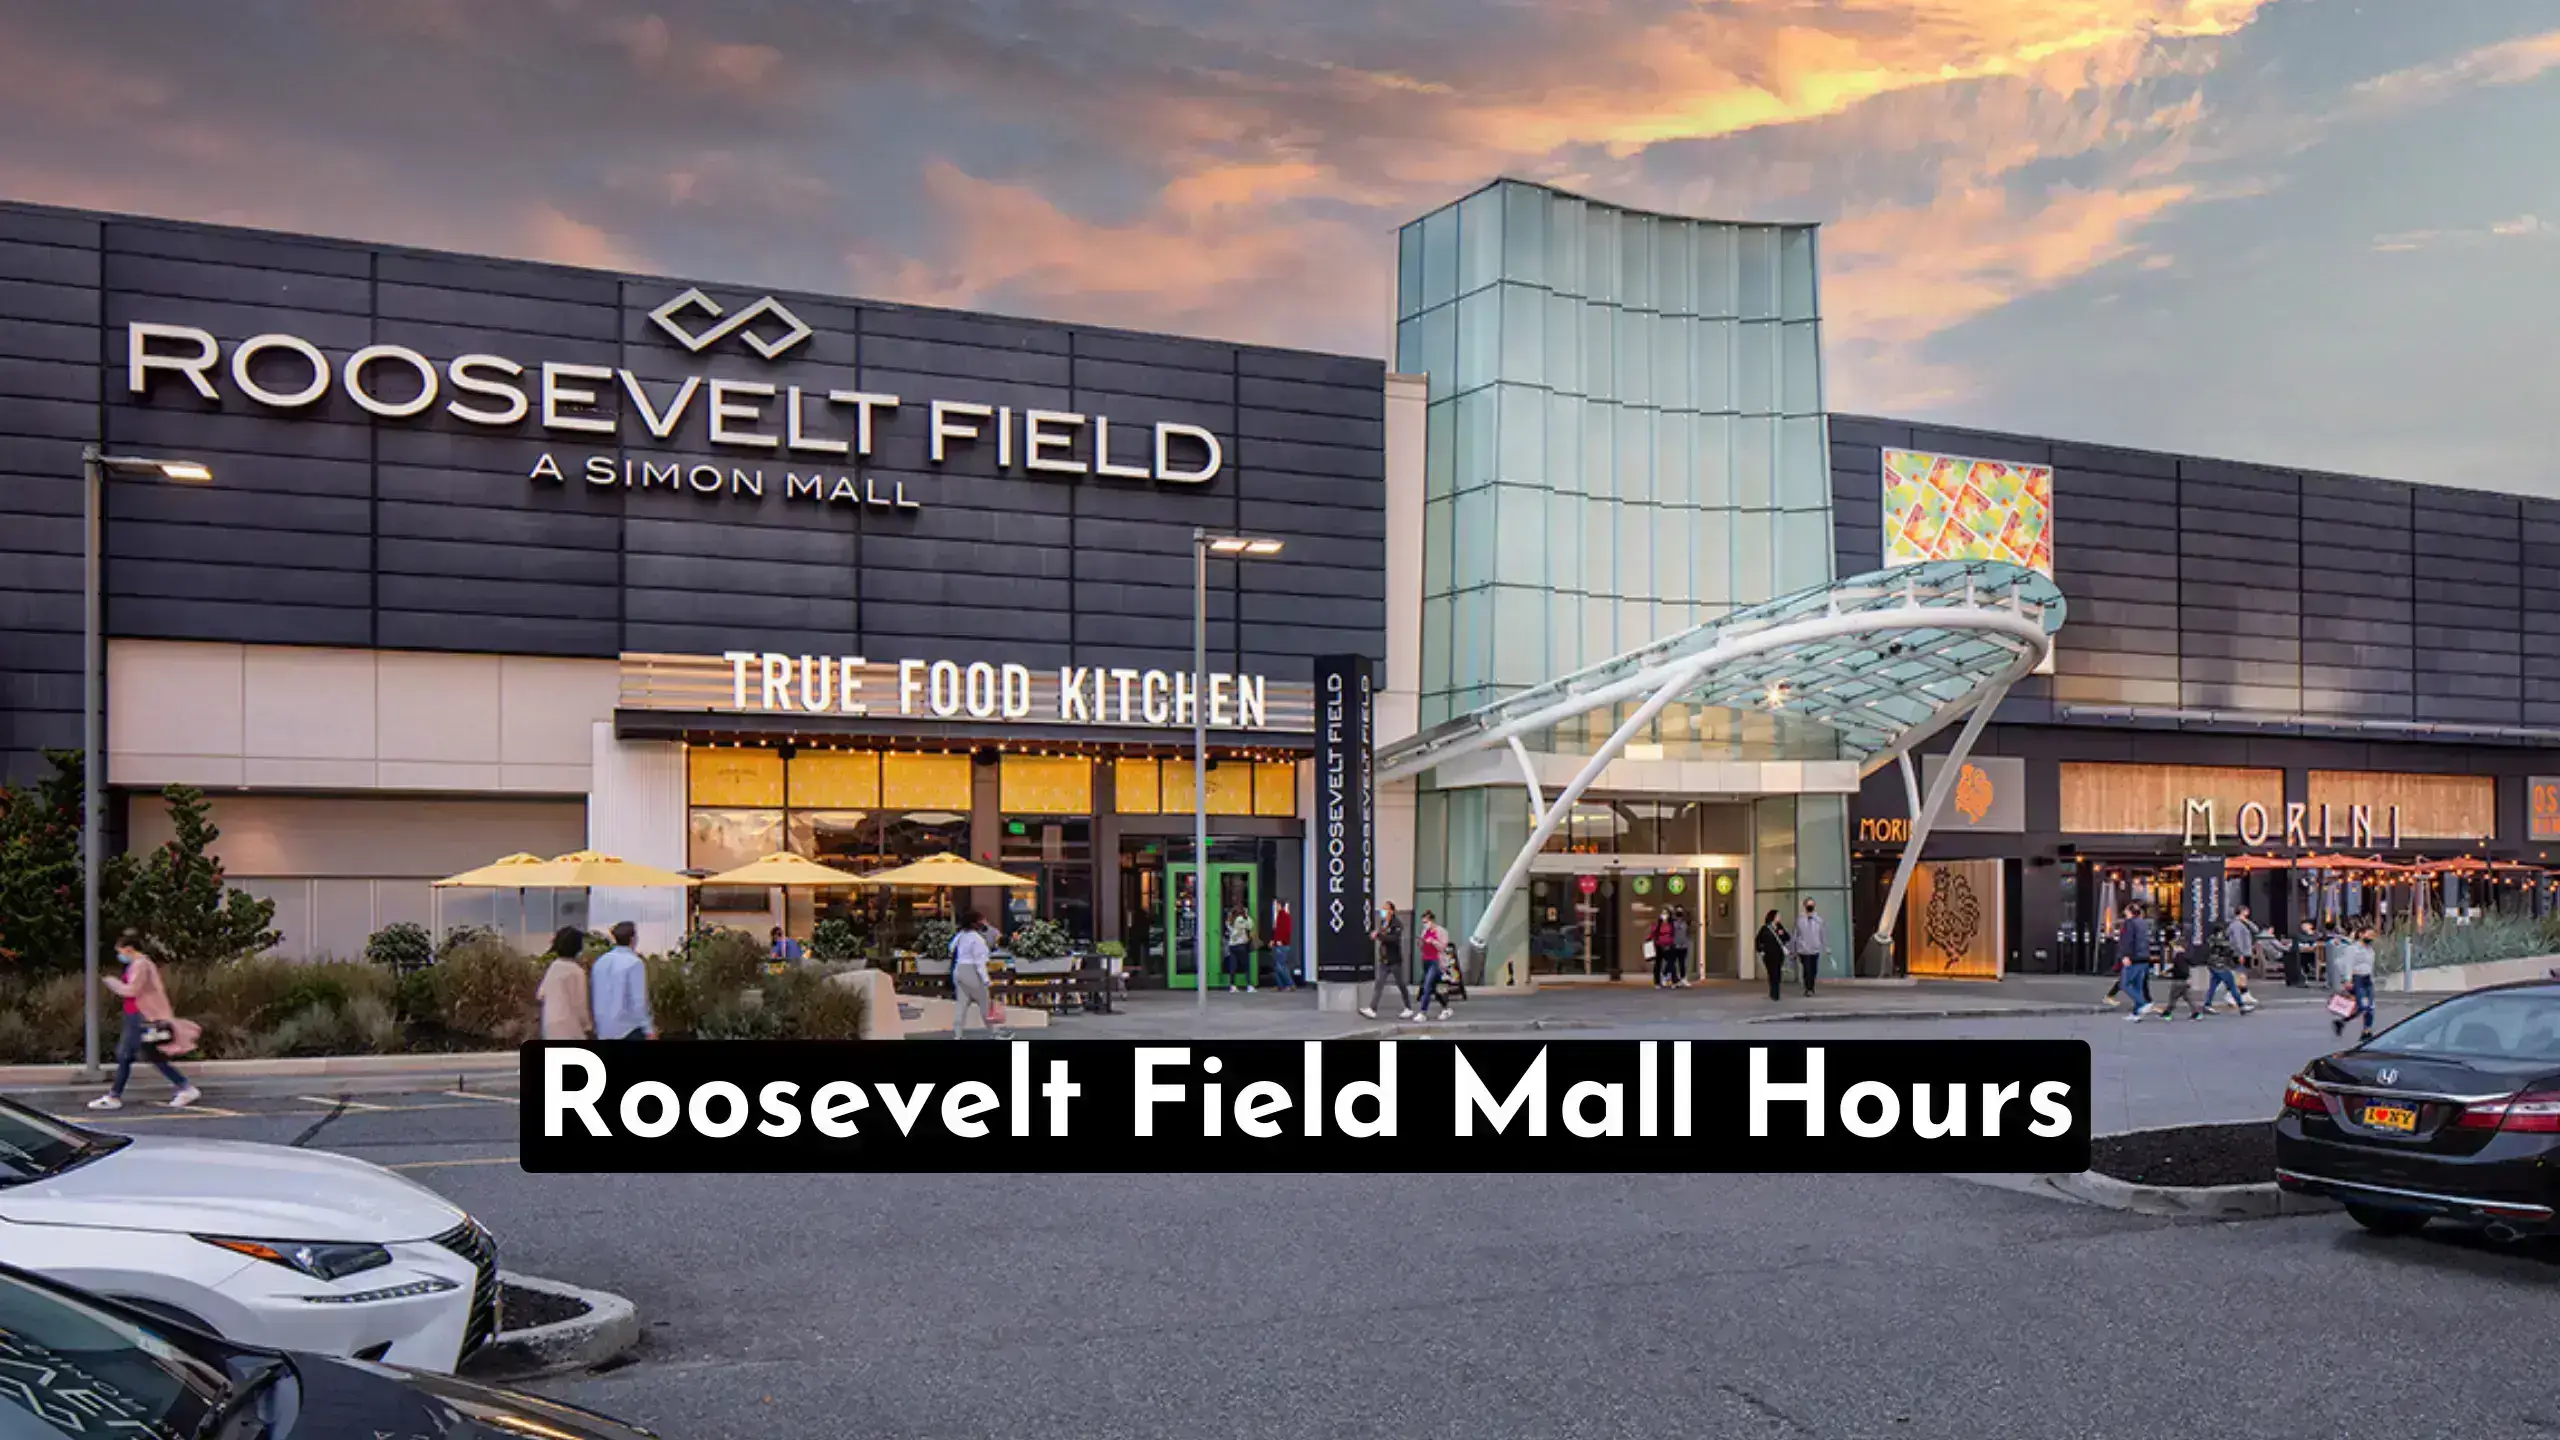 A Quick Way To Discover On Roosevelt Field Mall Hours | Also Find What Are The Available Stores, Amenities & Dining Options | store-hour.com